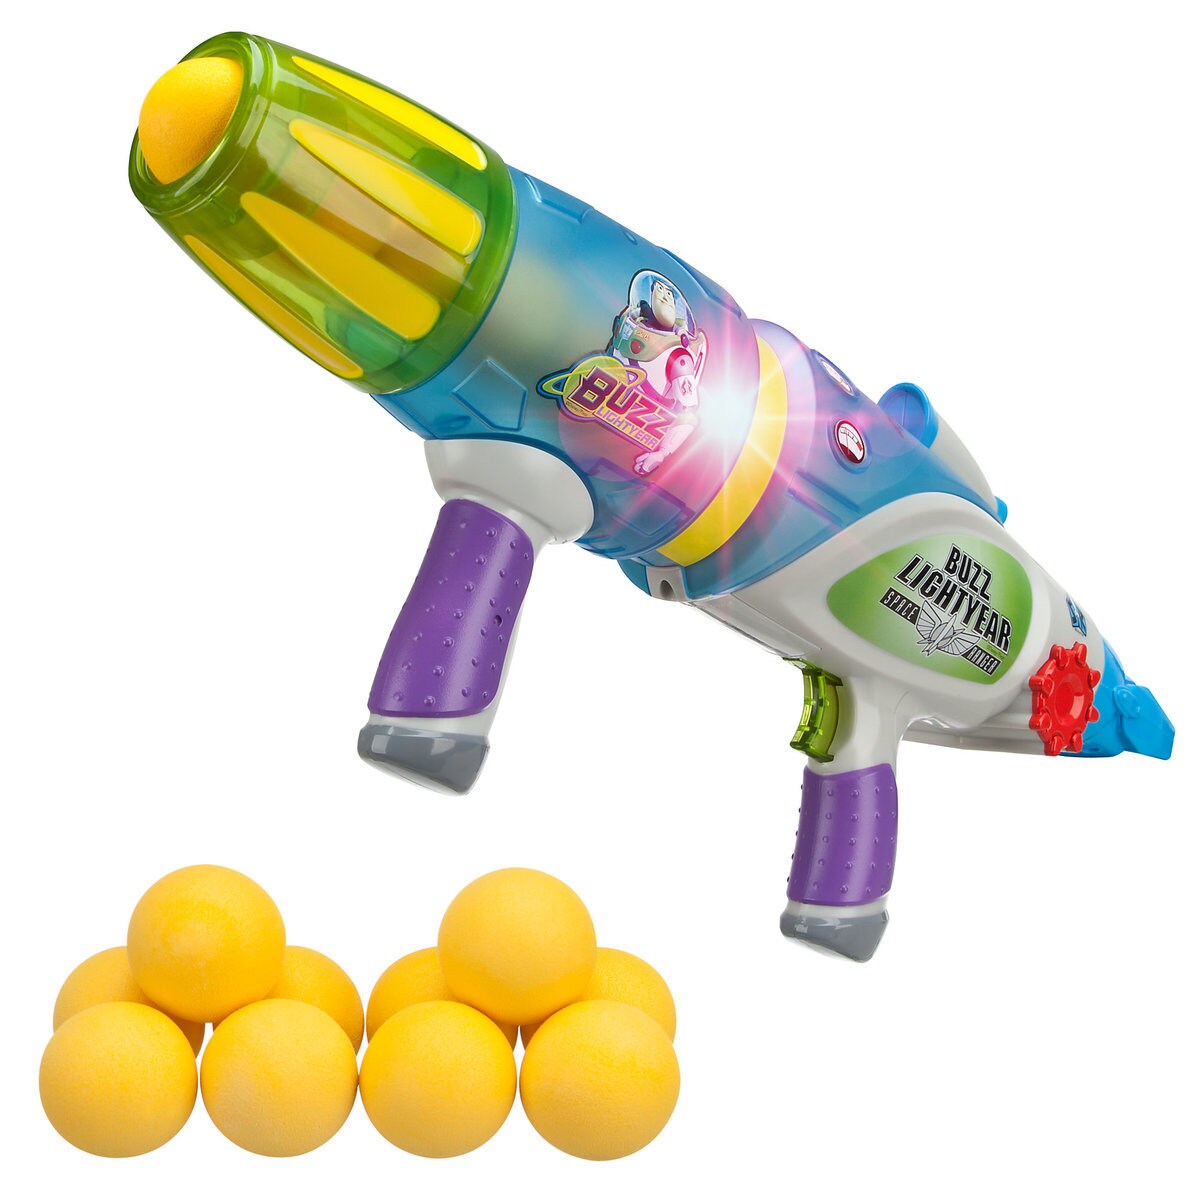 Product Image of Buzz Lightyear Glow-in-the-Dark Blaster # 1